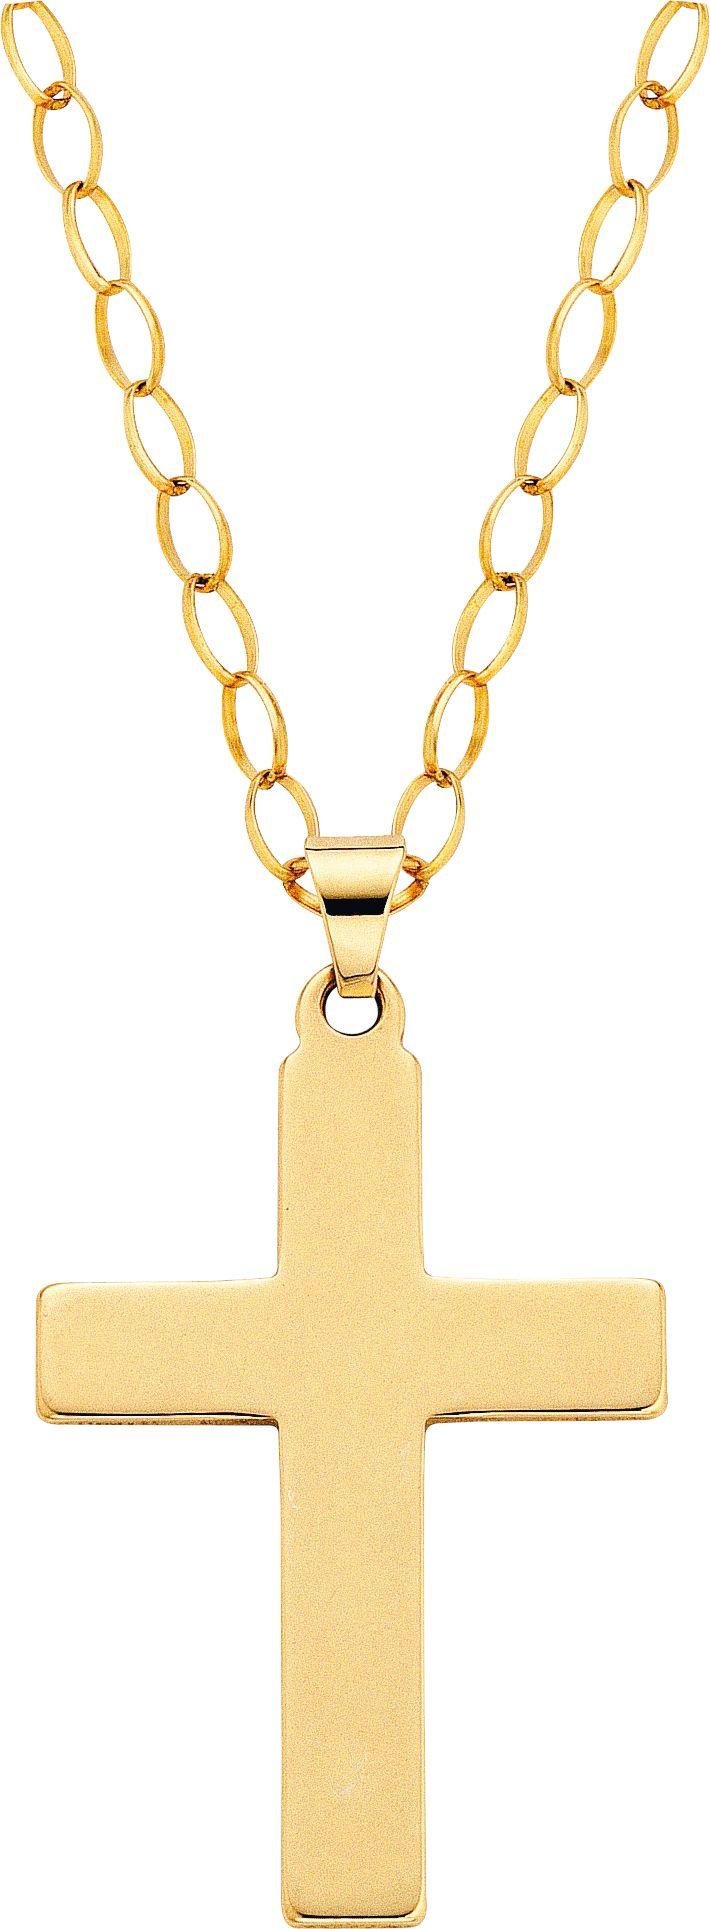 Revere 9ct Gold Chain Link Cross Pendant 22 Inch Necklace